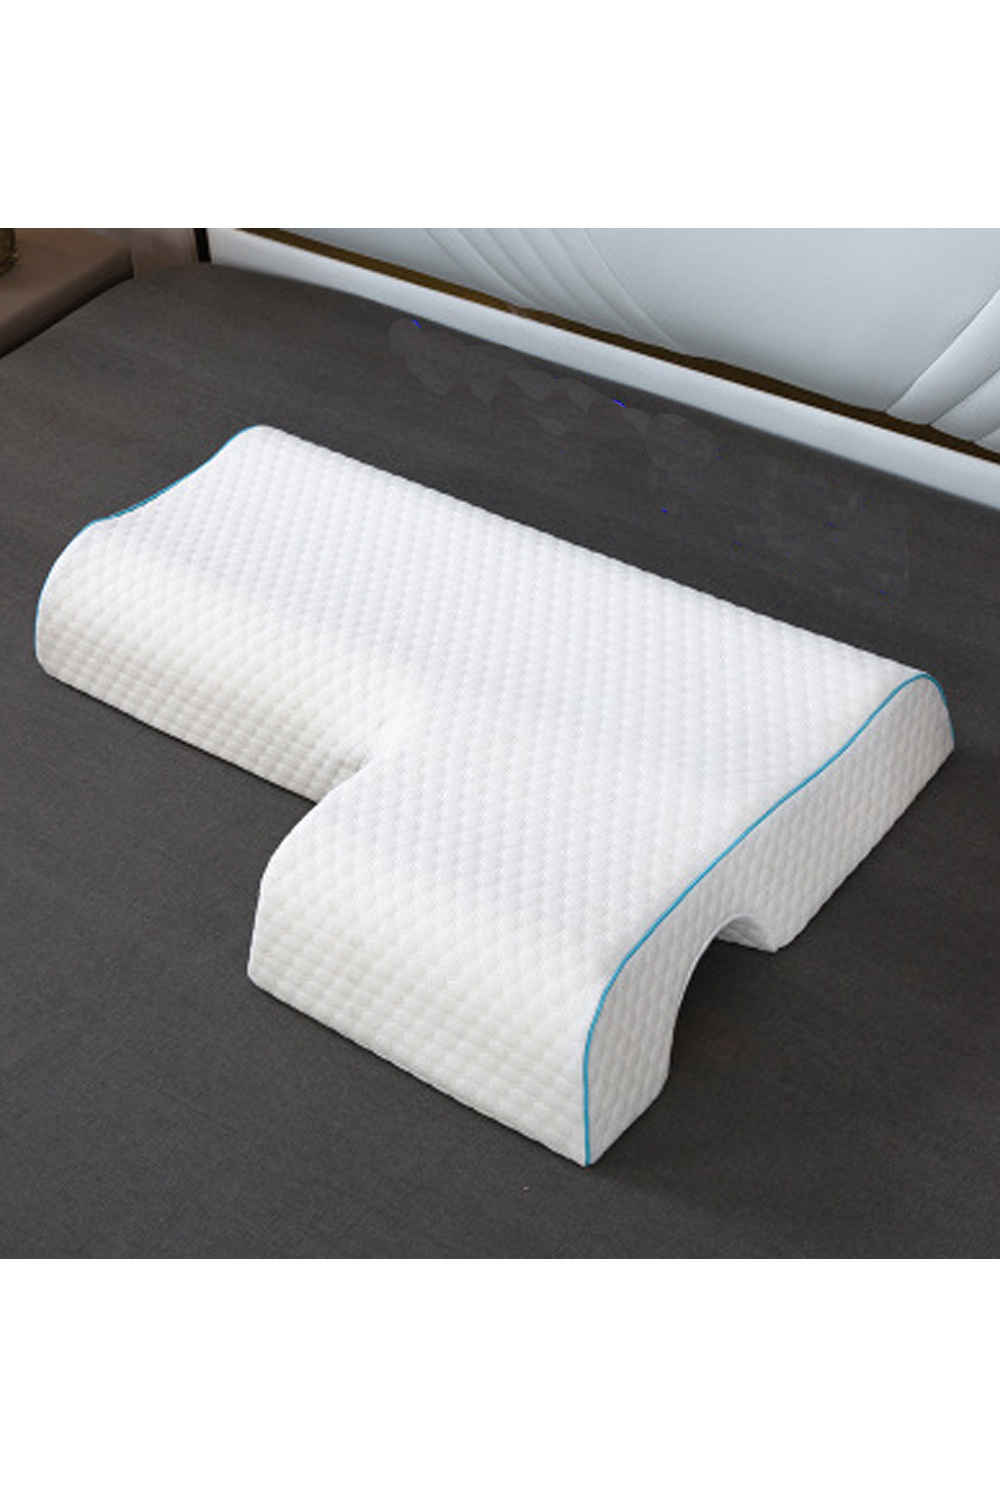 Unomatch Health Care Cervical Spine Comfort Space Memory Foam Pillow